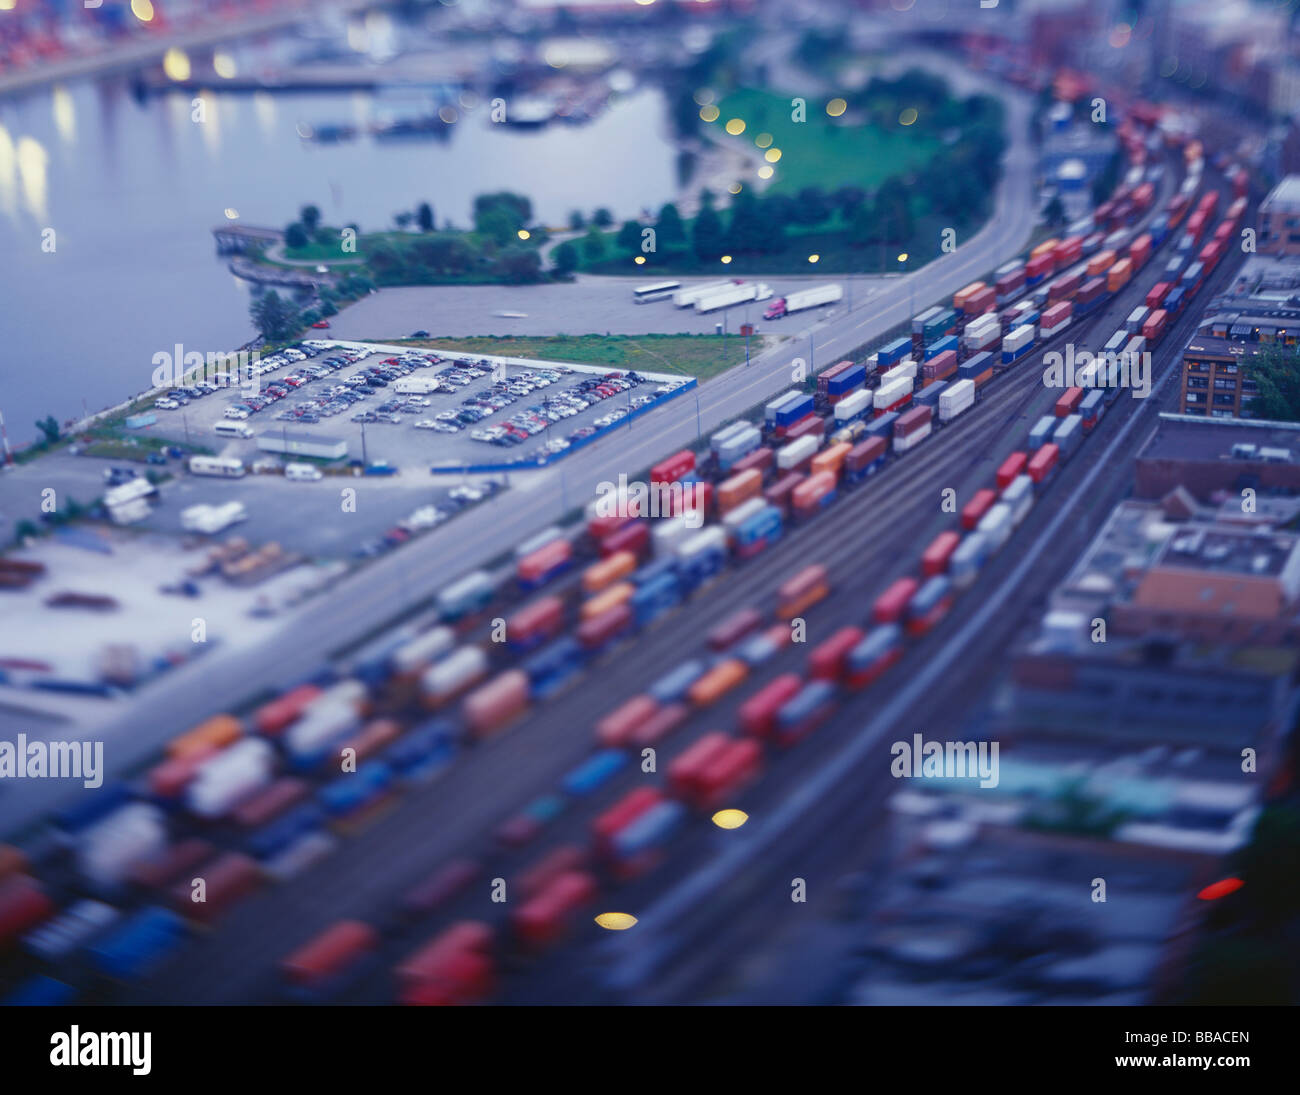 Cargo trains in a shunting yard, tilt-shift photography Stock Photo